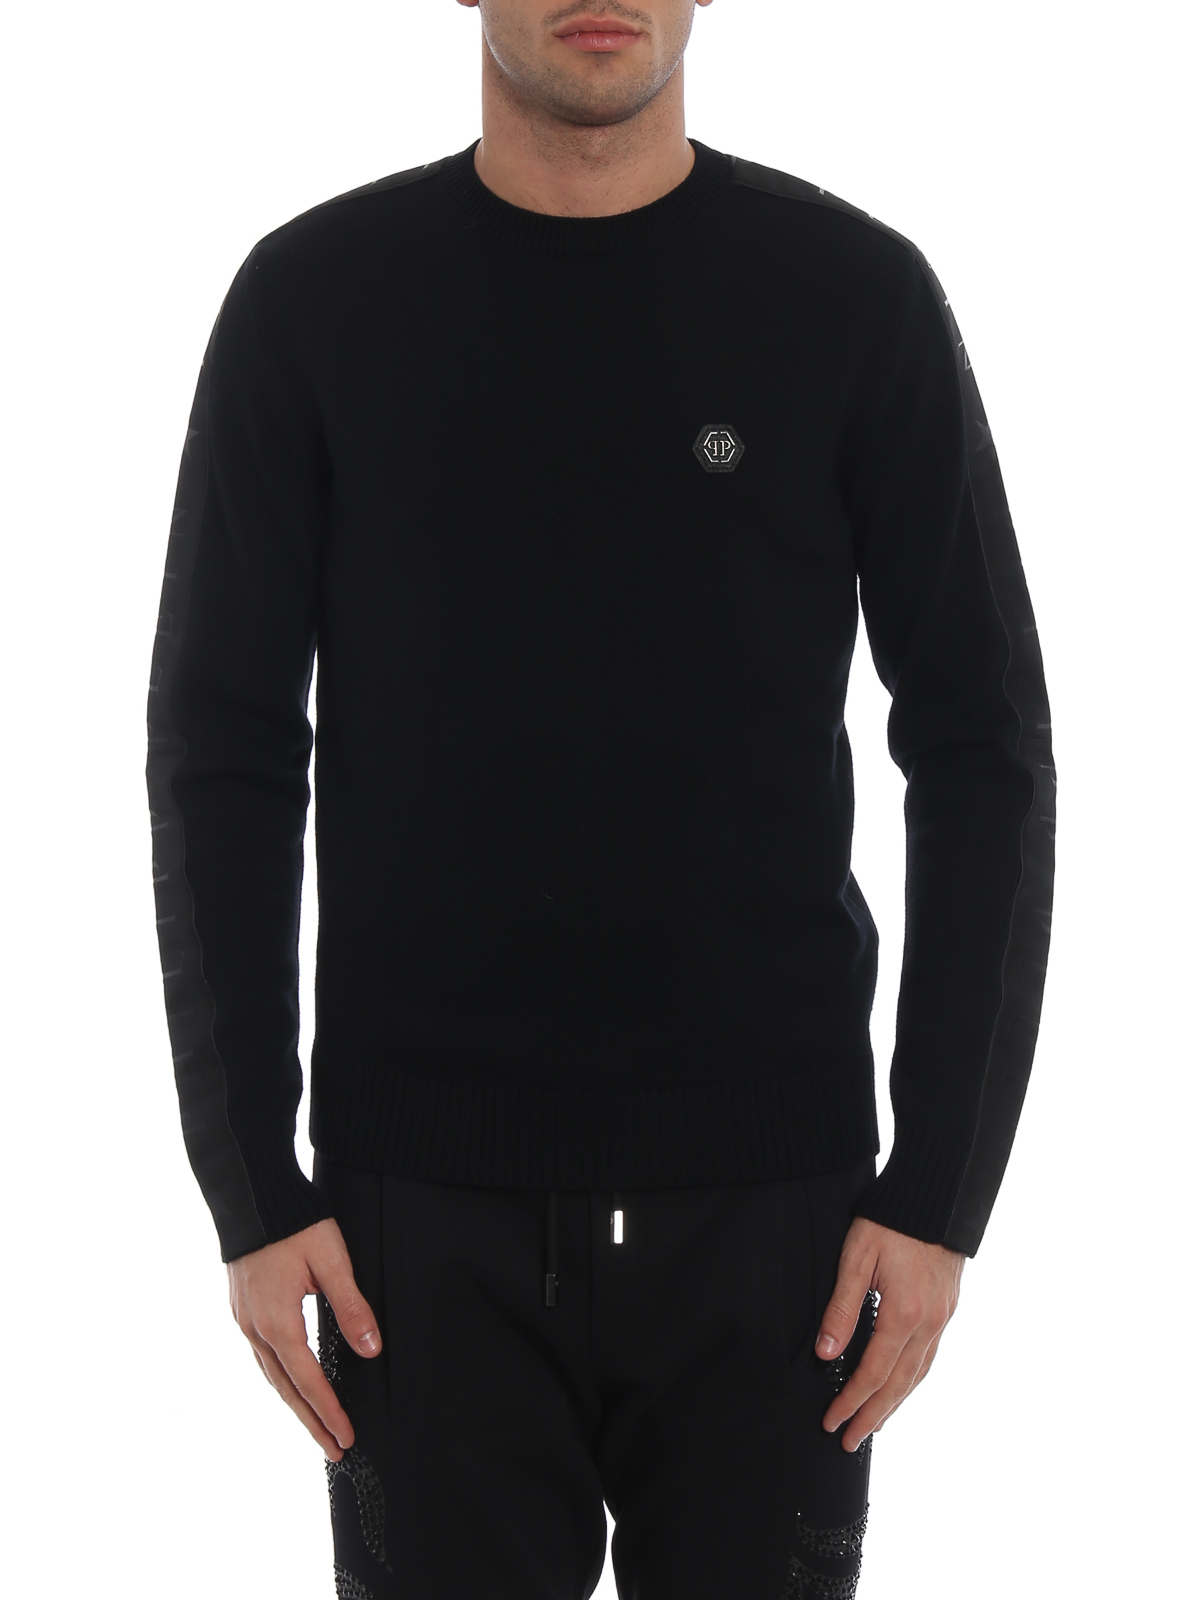 Philipp Plein Wool Jumper in Black for Men Mens Clothing Sweaters and knitwear V-neck jumpers 